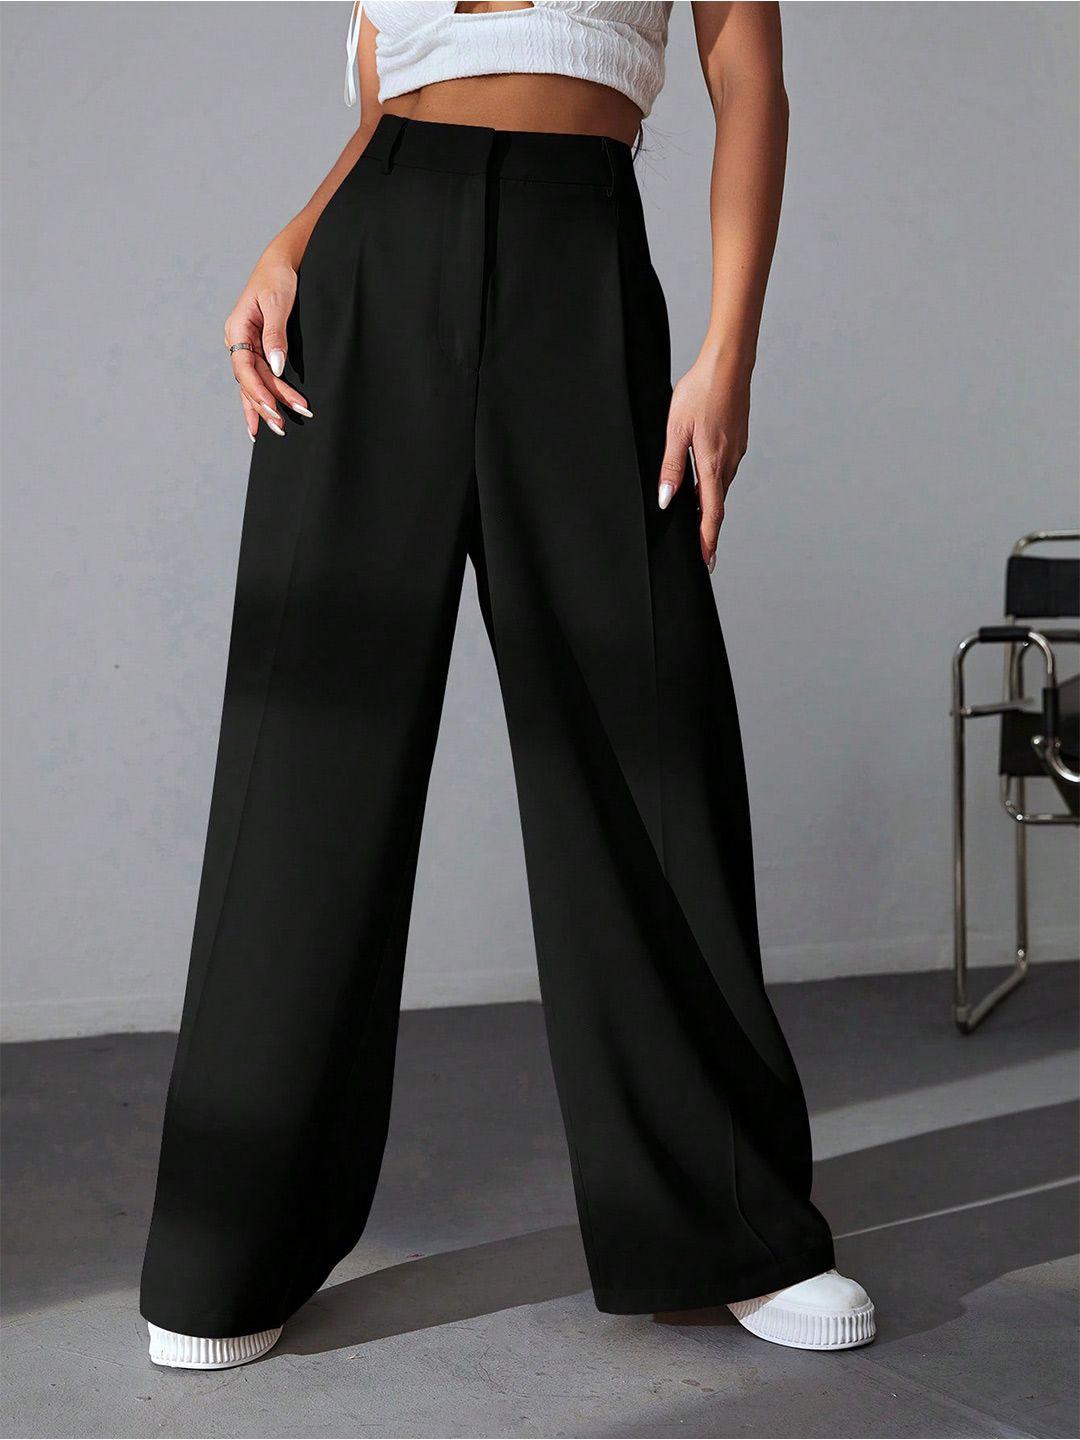 aahwan-women-loose-fit-high-rise-plain-parallel-trousers